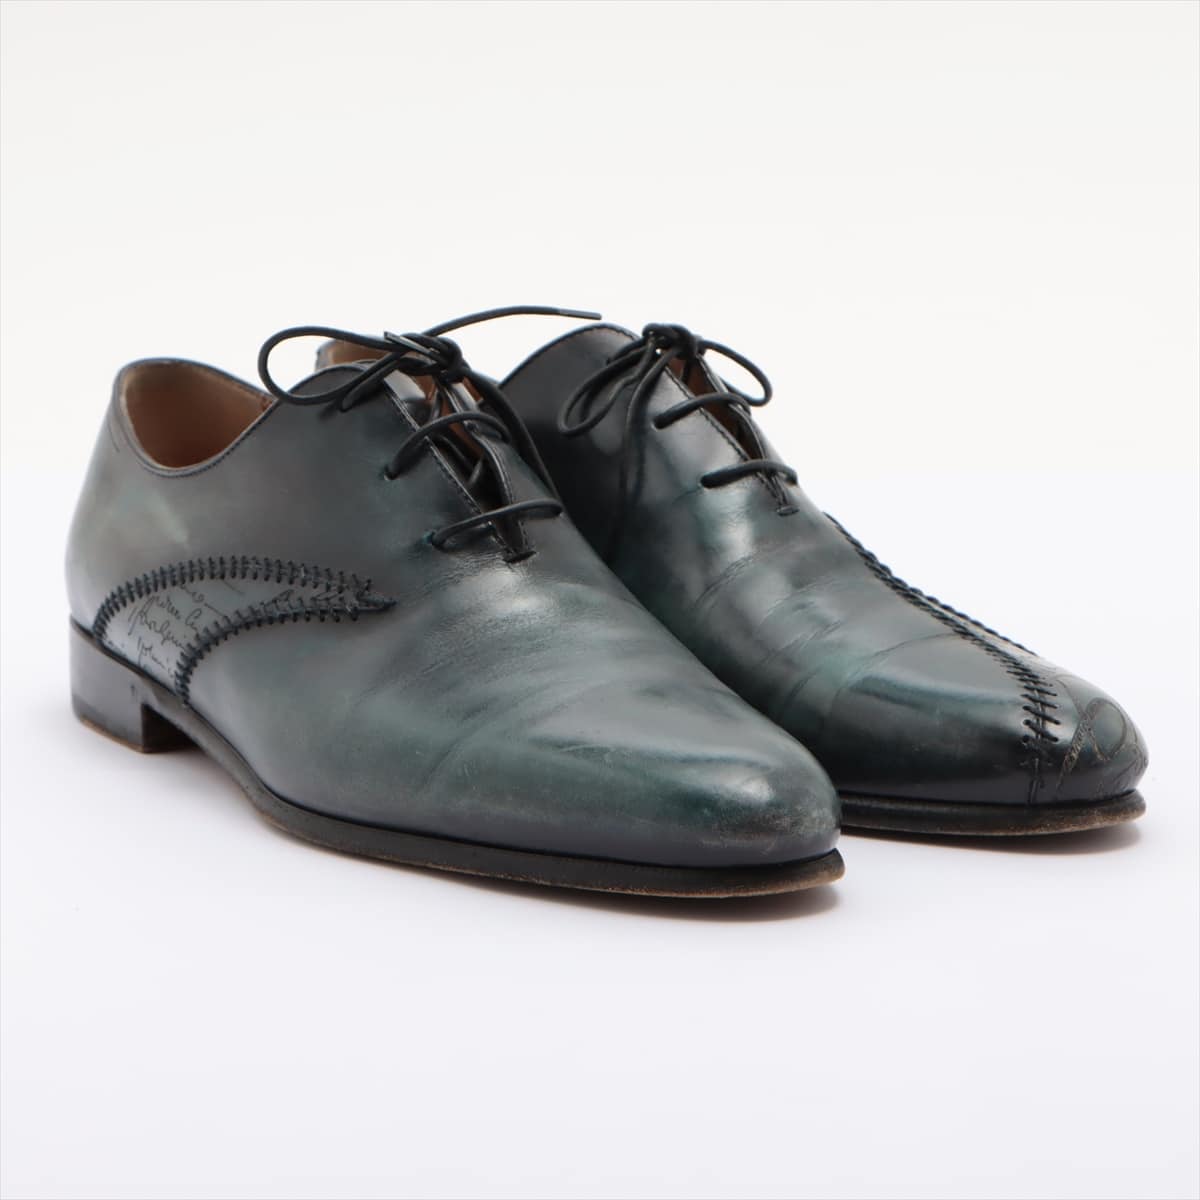 Berluti Leather Leather shoes 8 1/2 Men's Green Lapier-Serprizée Hand stitched With genuine shoe tree